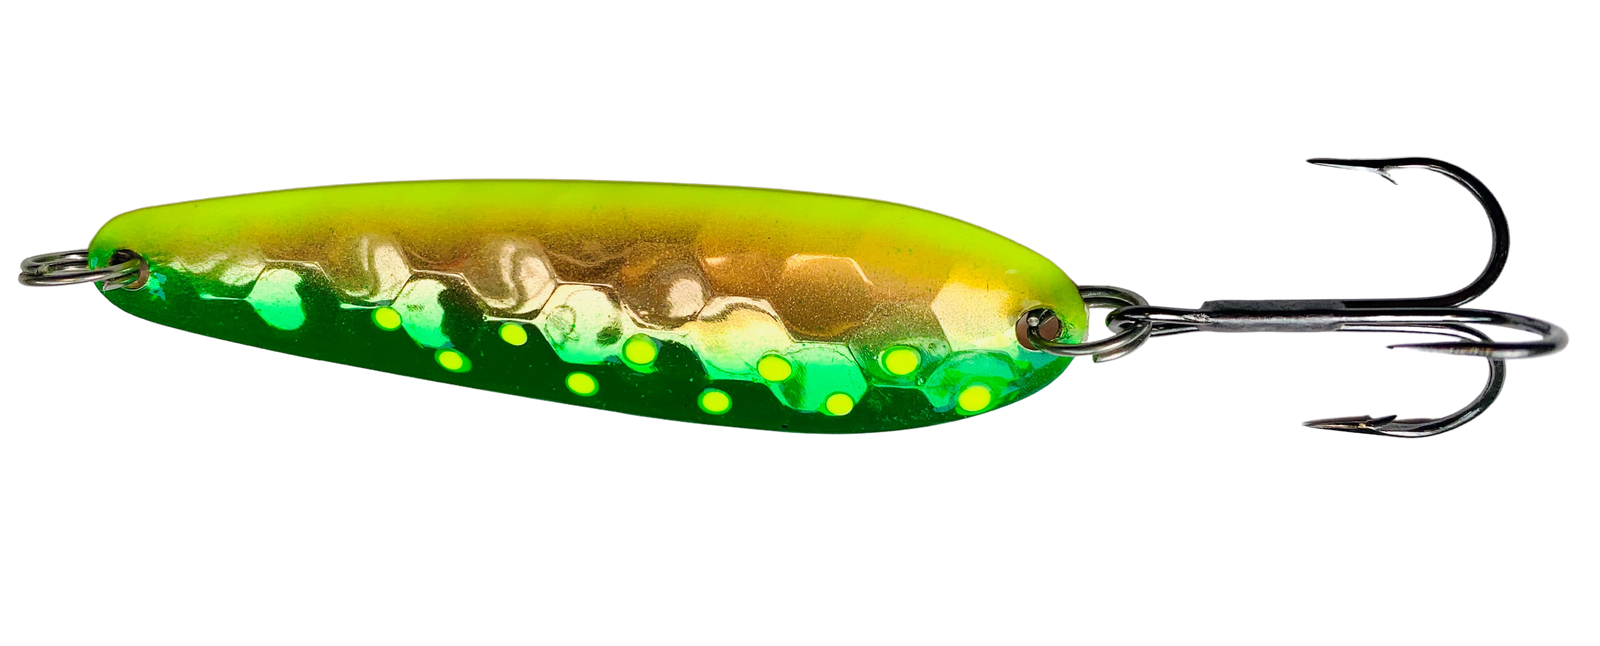 4 Pieces 2oz Casting Crocodile Spoons Fishing Trolling Lures - 4 Colors